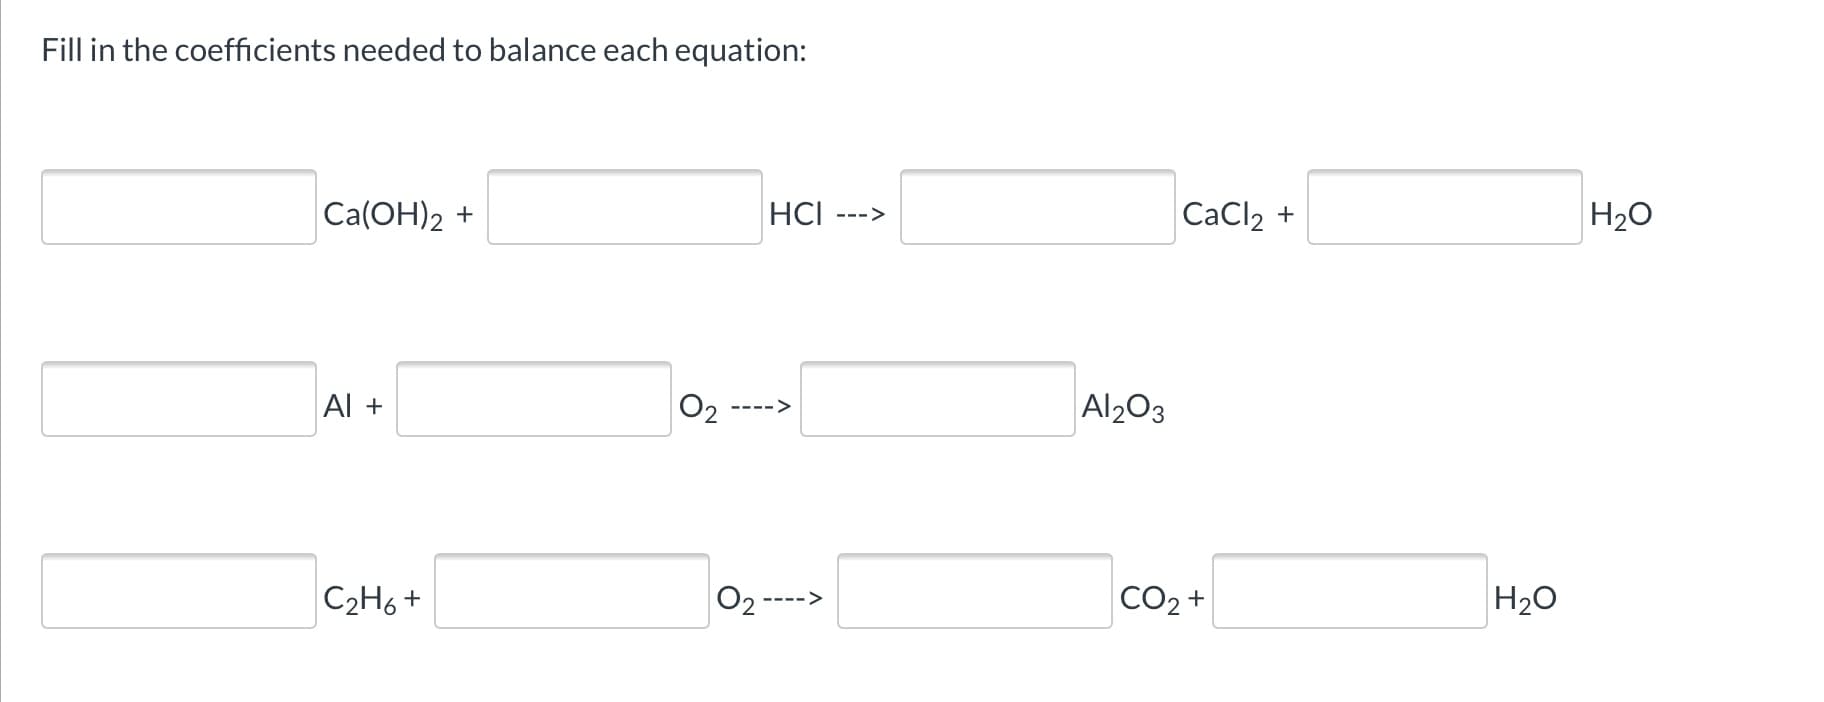 Fill in the coefficients needed to balance each equation:
Ca(OH)2 +
H20
HCI
CaCl2 +
--->
Al203
Al +
02
---->
O2
CO2 +
C2H6 +
H20
<>
